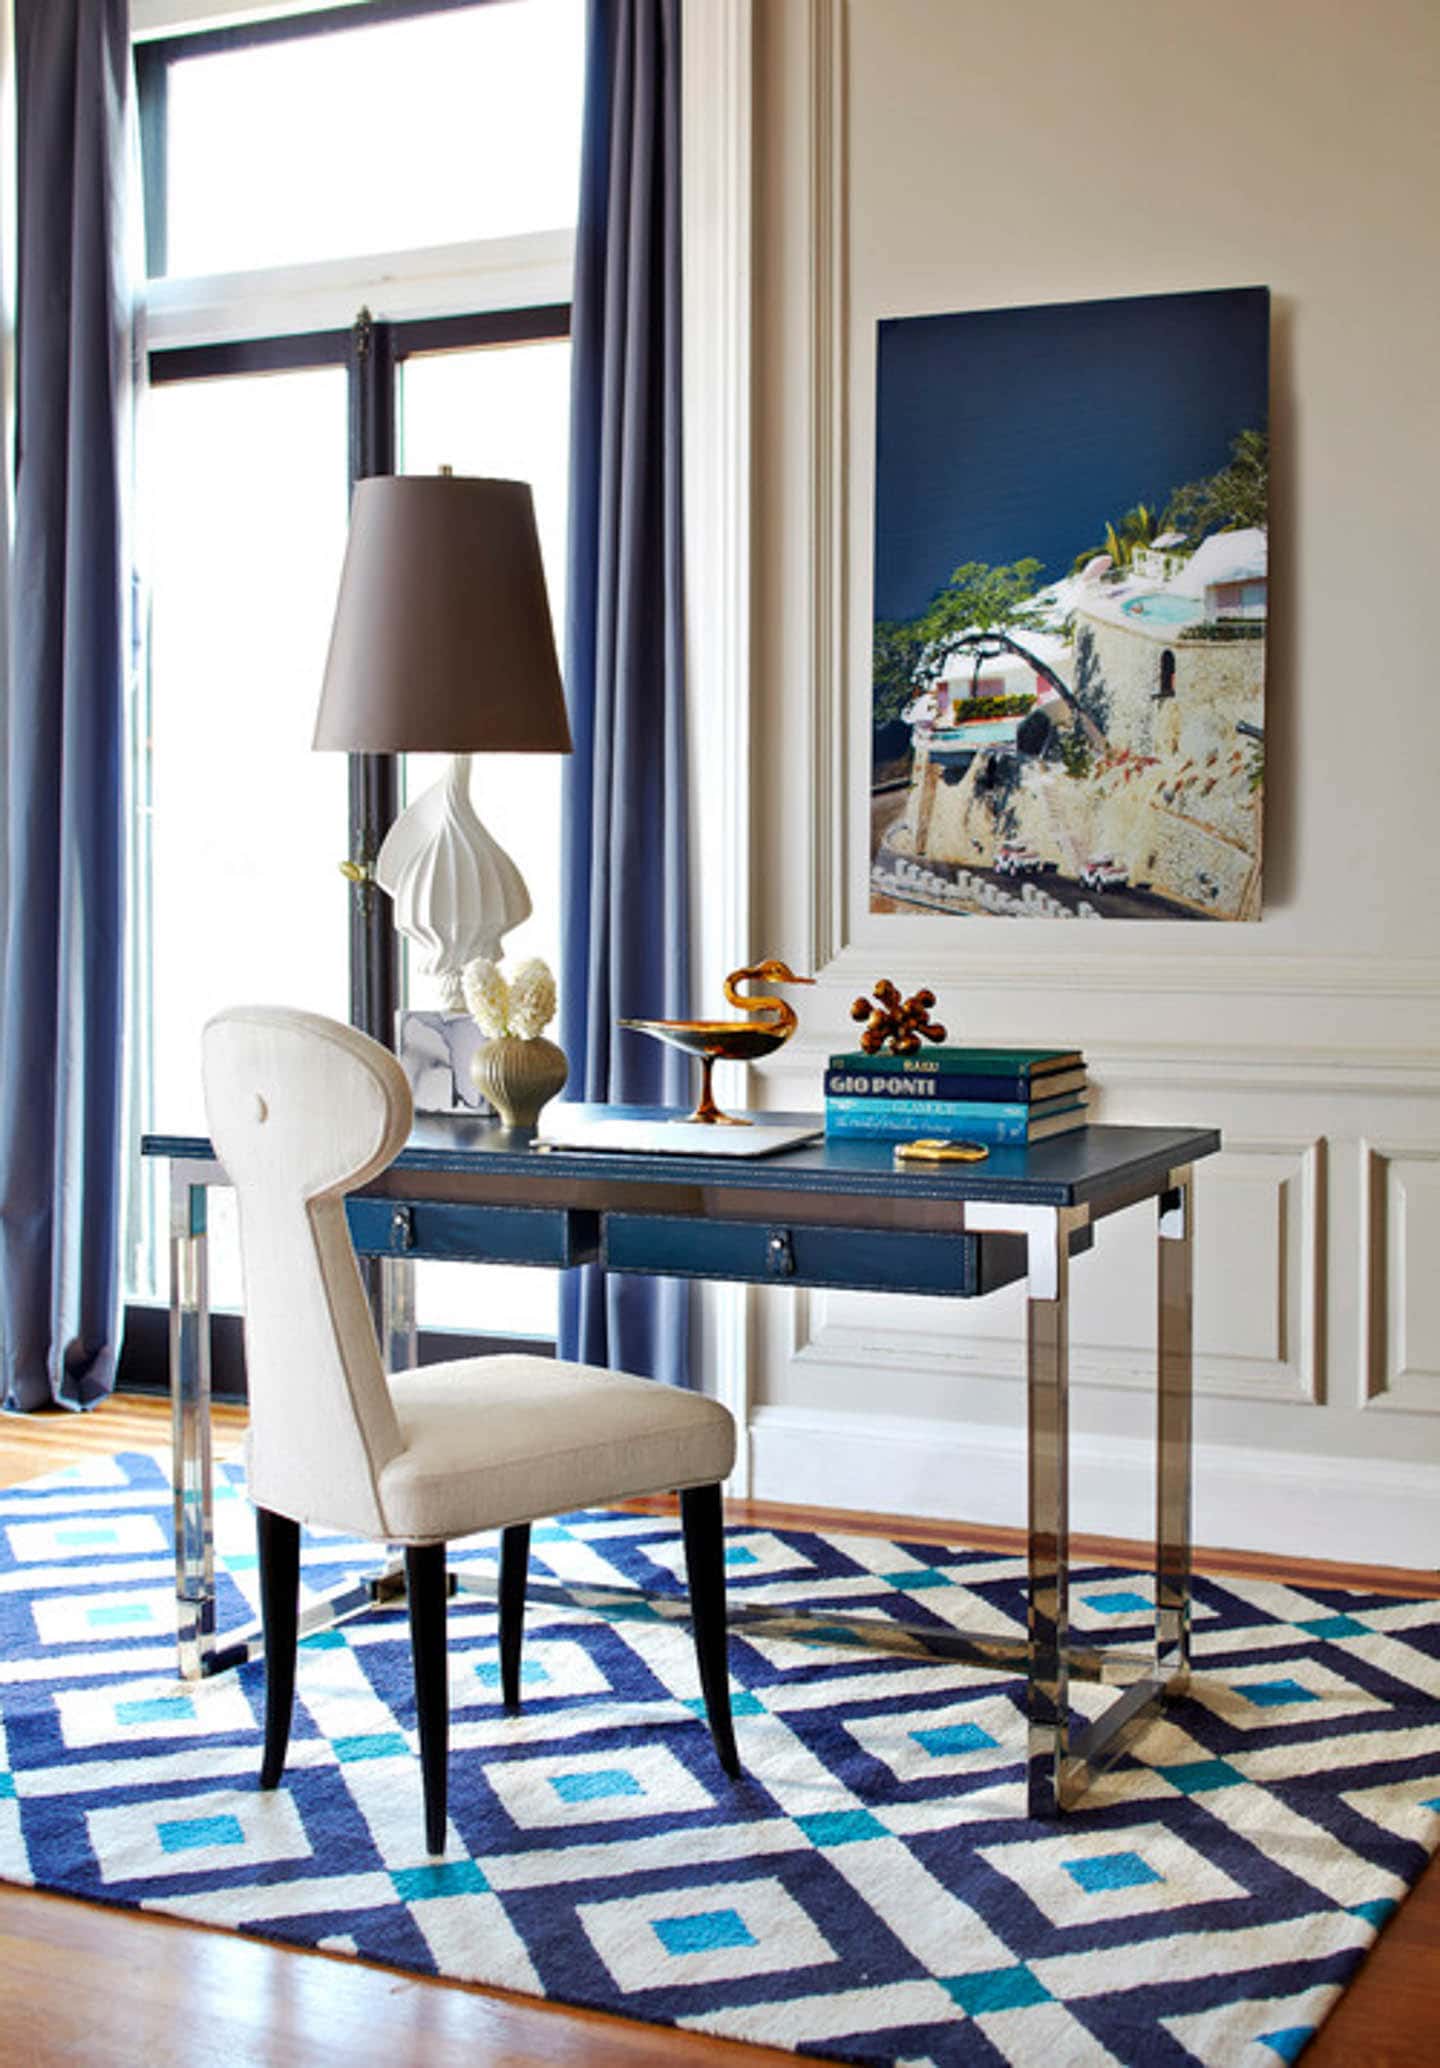 Small blue desk on a blue and white geometric area rug in a white room with dark blue curtains